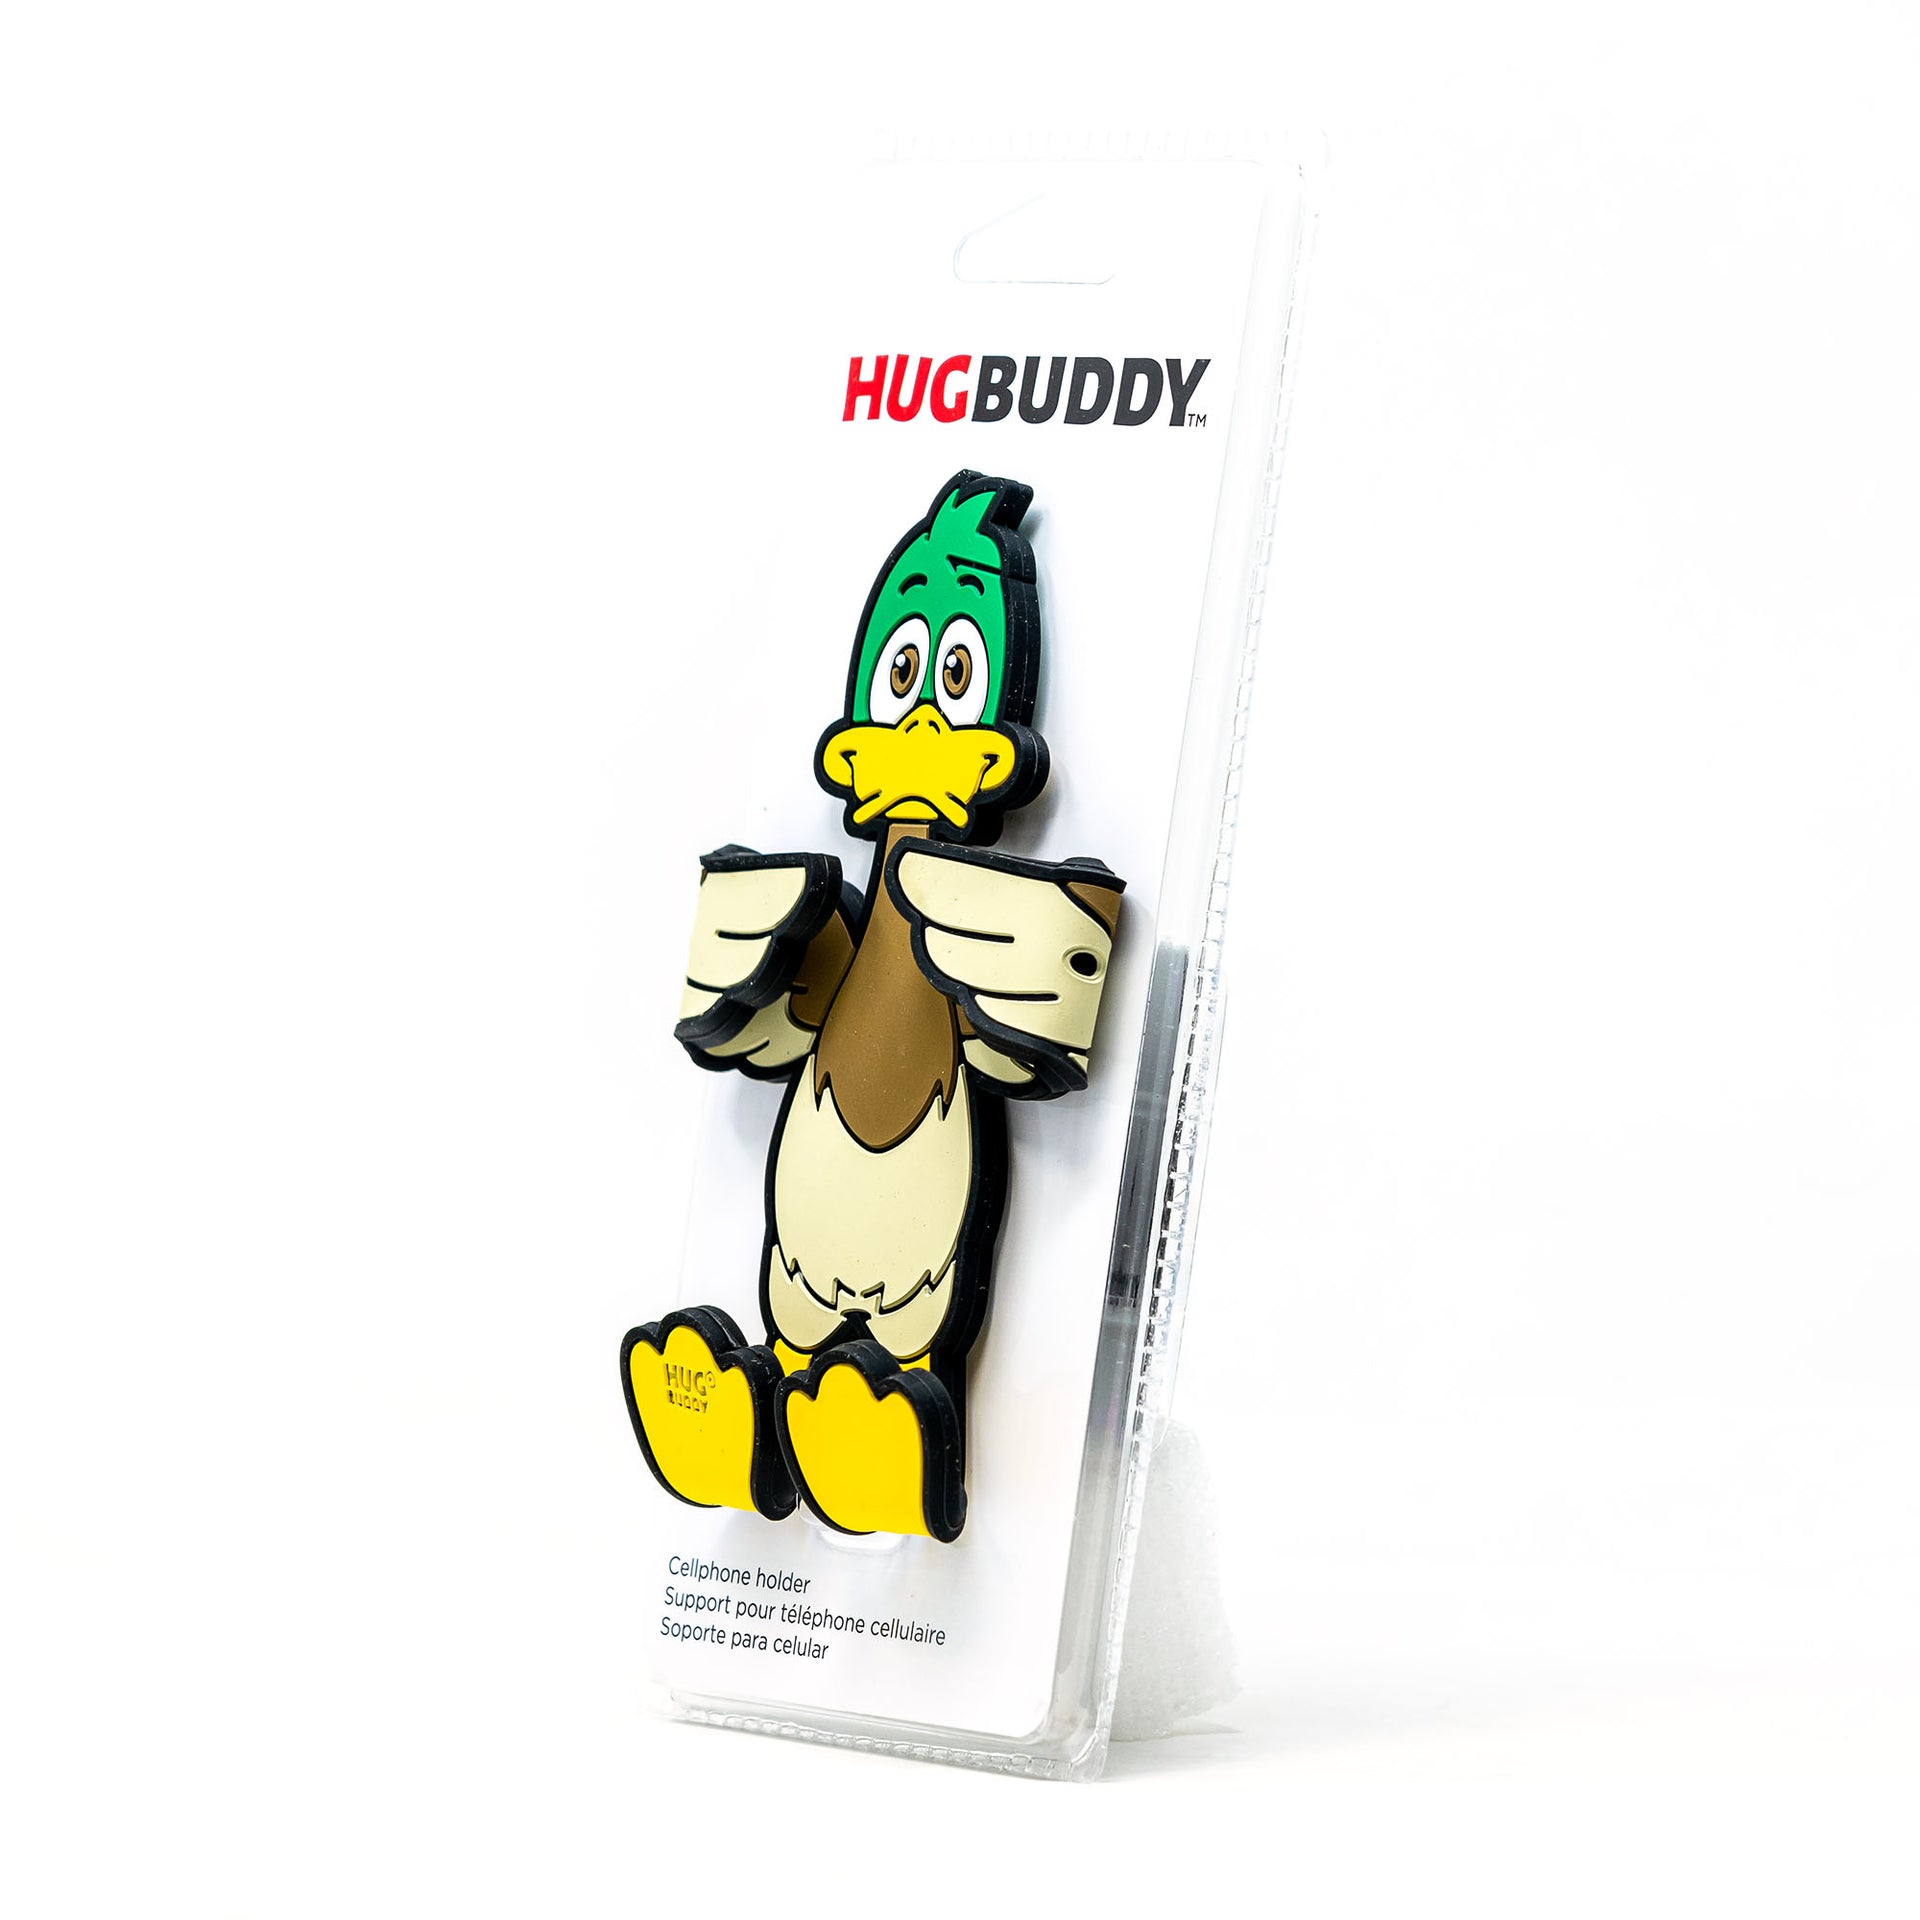 Image of Crumbs the duck Hug Buddy packaging 45 degree angle view